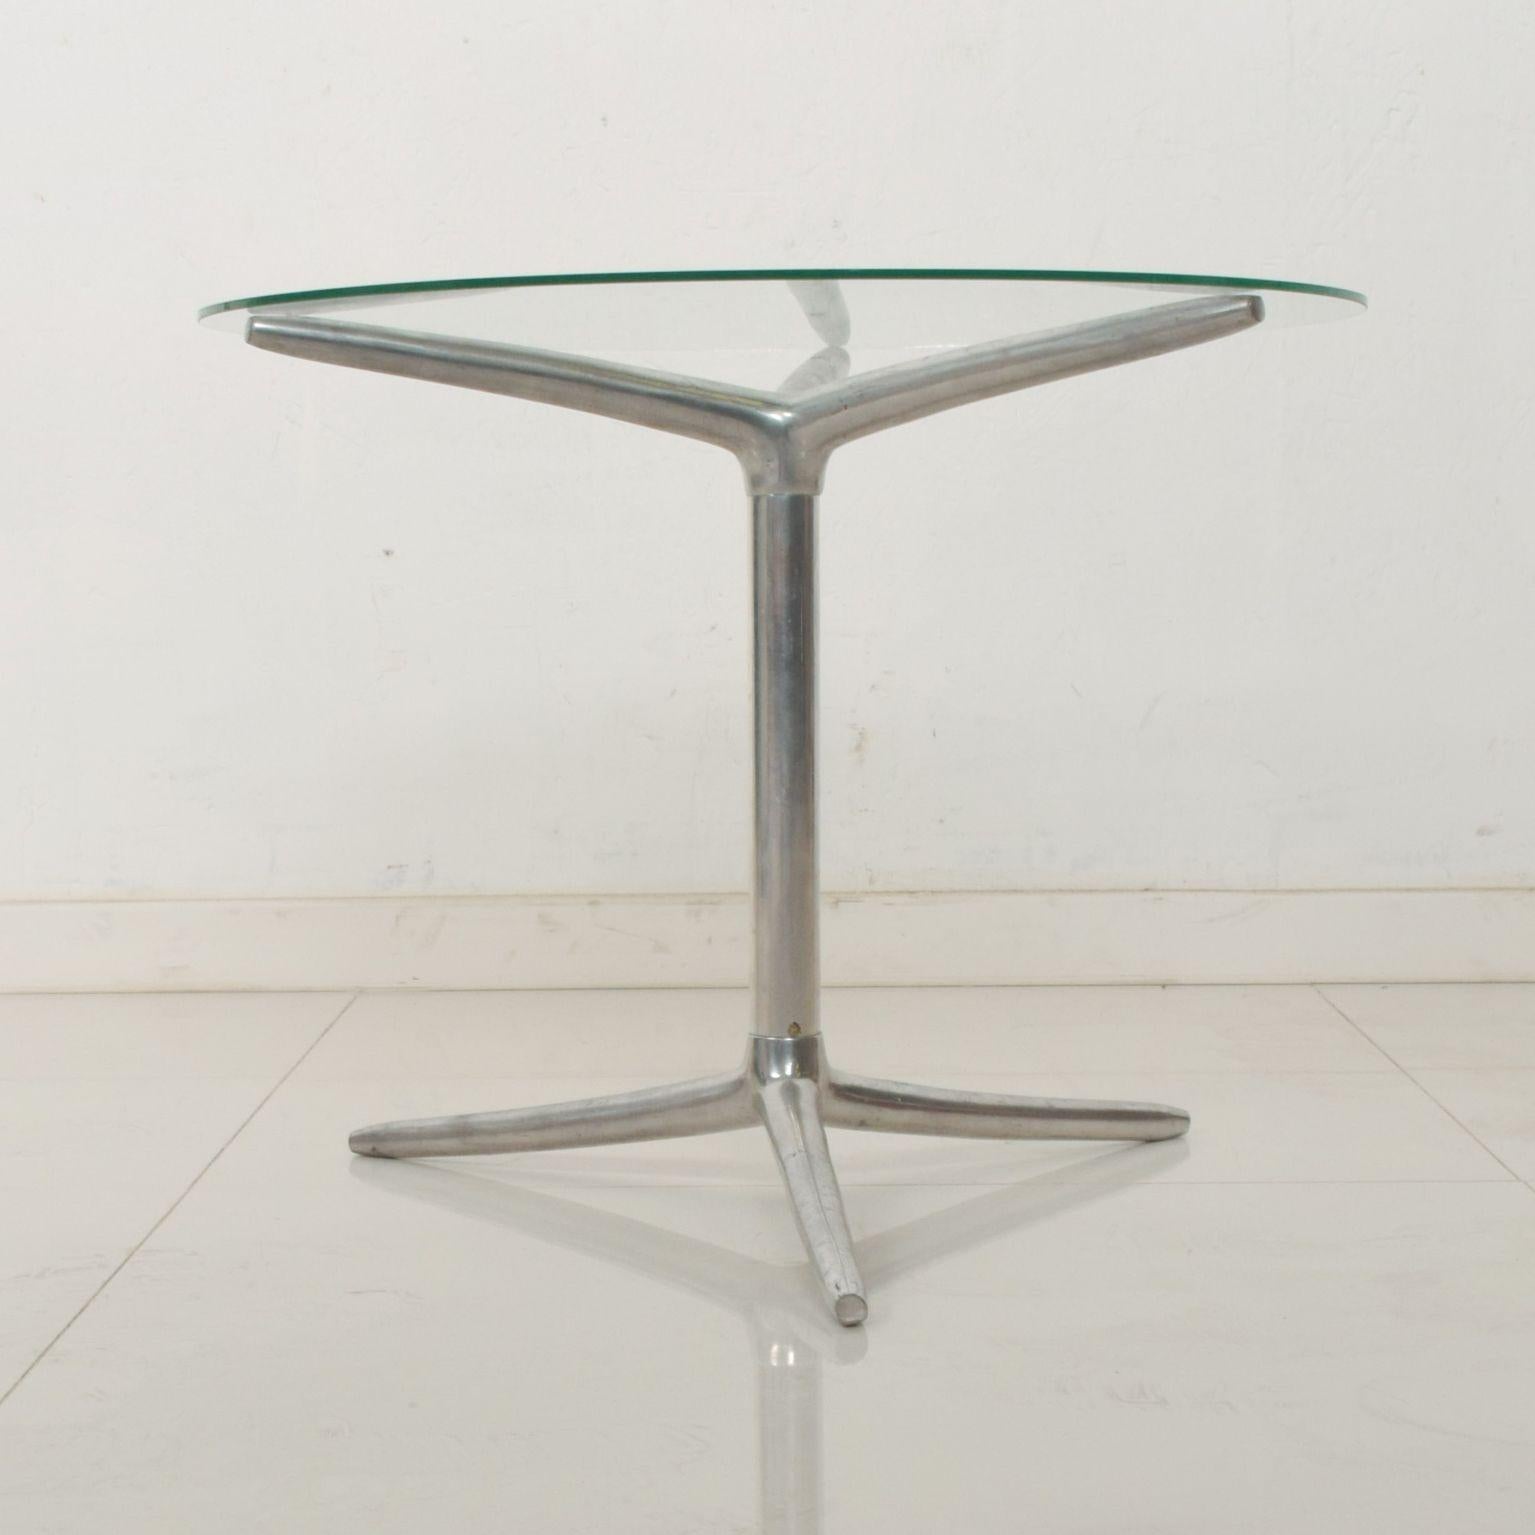 AMBIANIC offers
1970s Aluminum Tripod Side Table Round Glass Top Mid Century Modern
15.25 H x 19.25 in diameter
Original unrestored vintage preowned condition.
Refer to images.
Delivery to LA